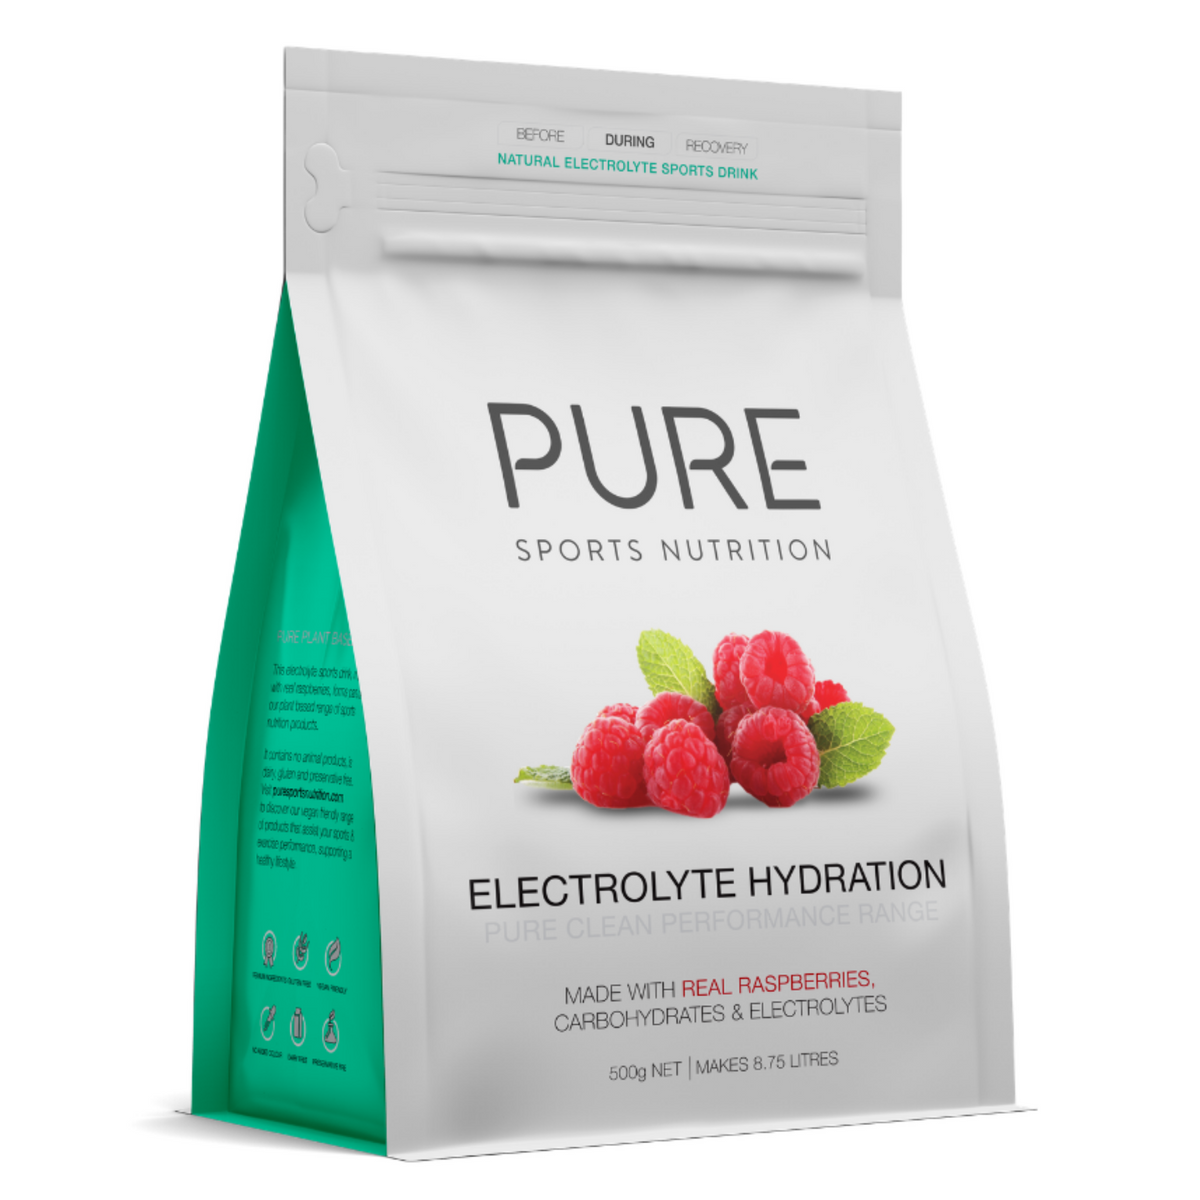 PURE Sports Nutrition Raspberry Electrolyte Hydration drink mix